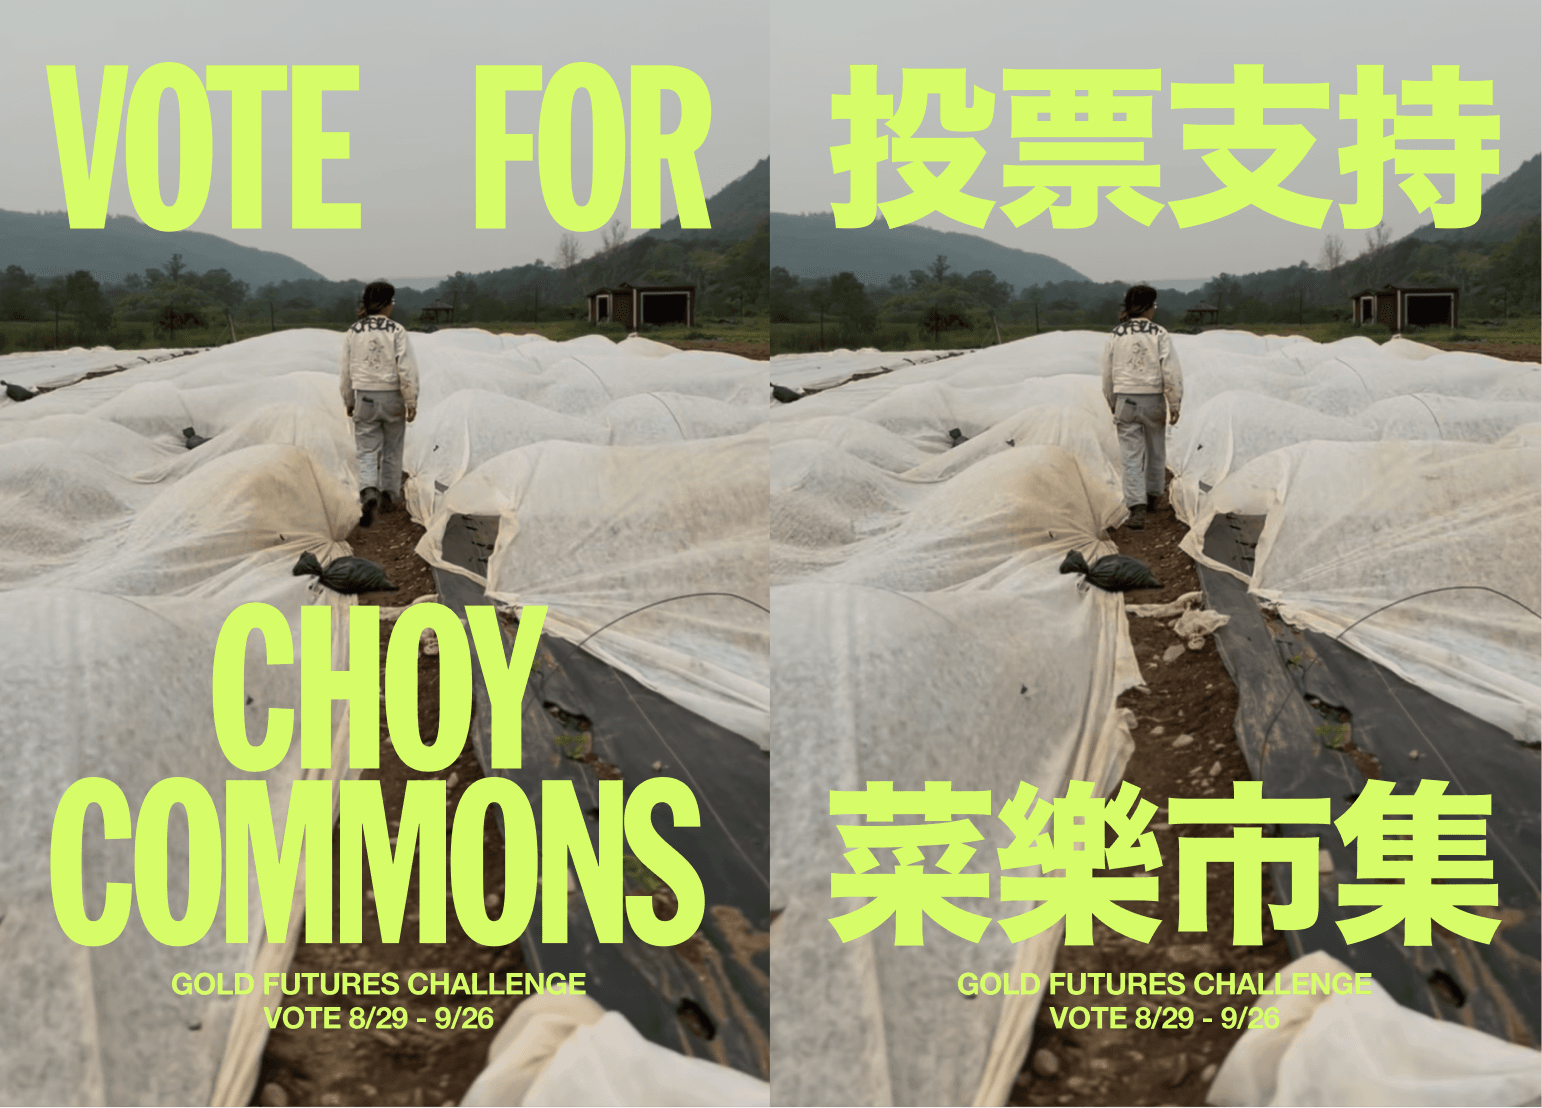 Support Choy Commons